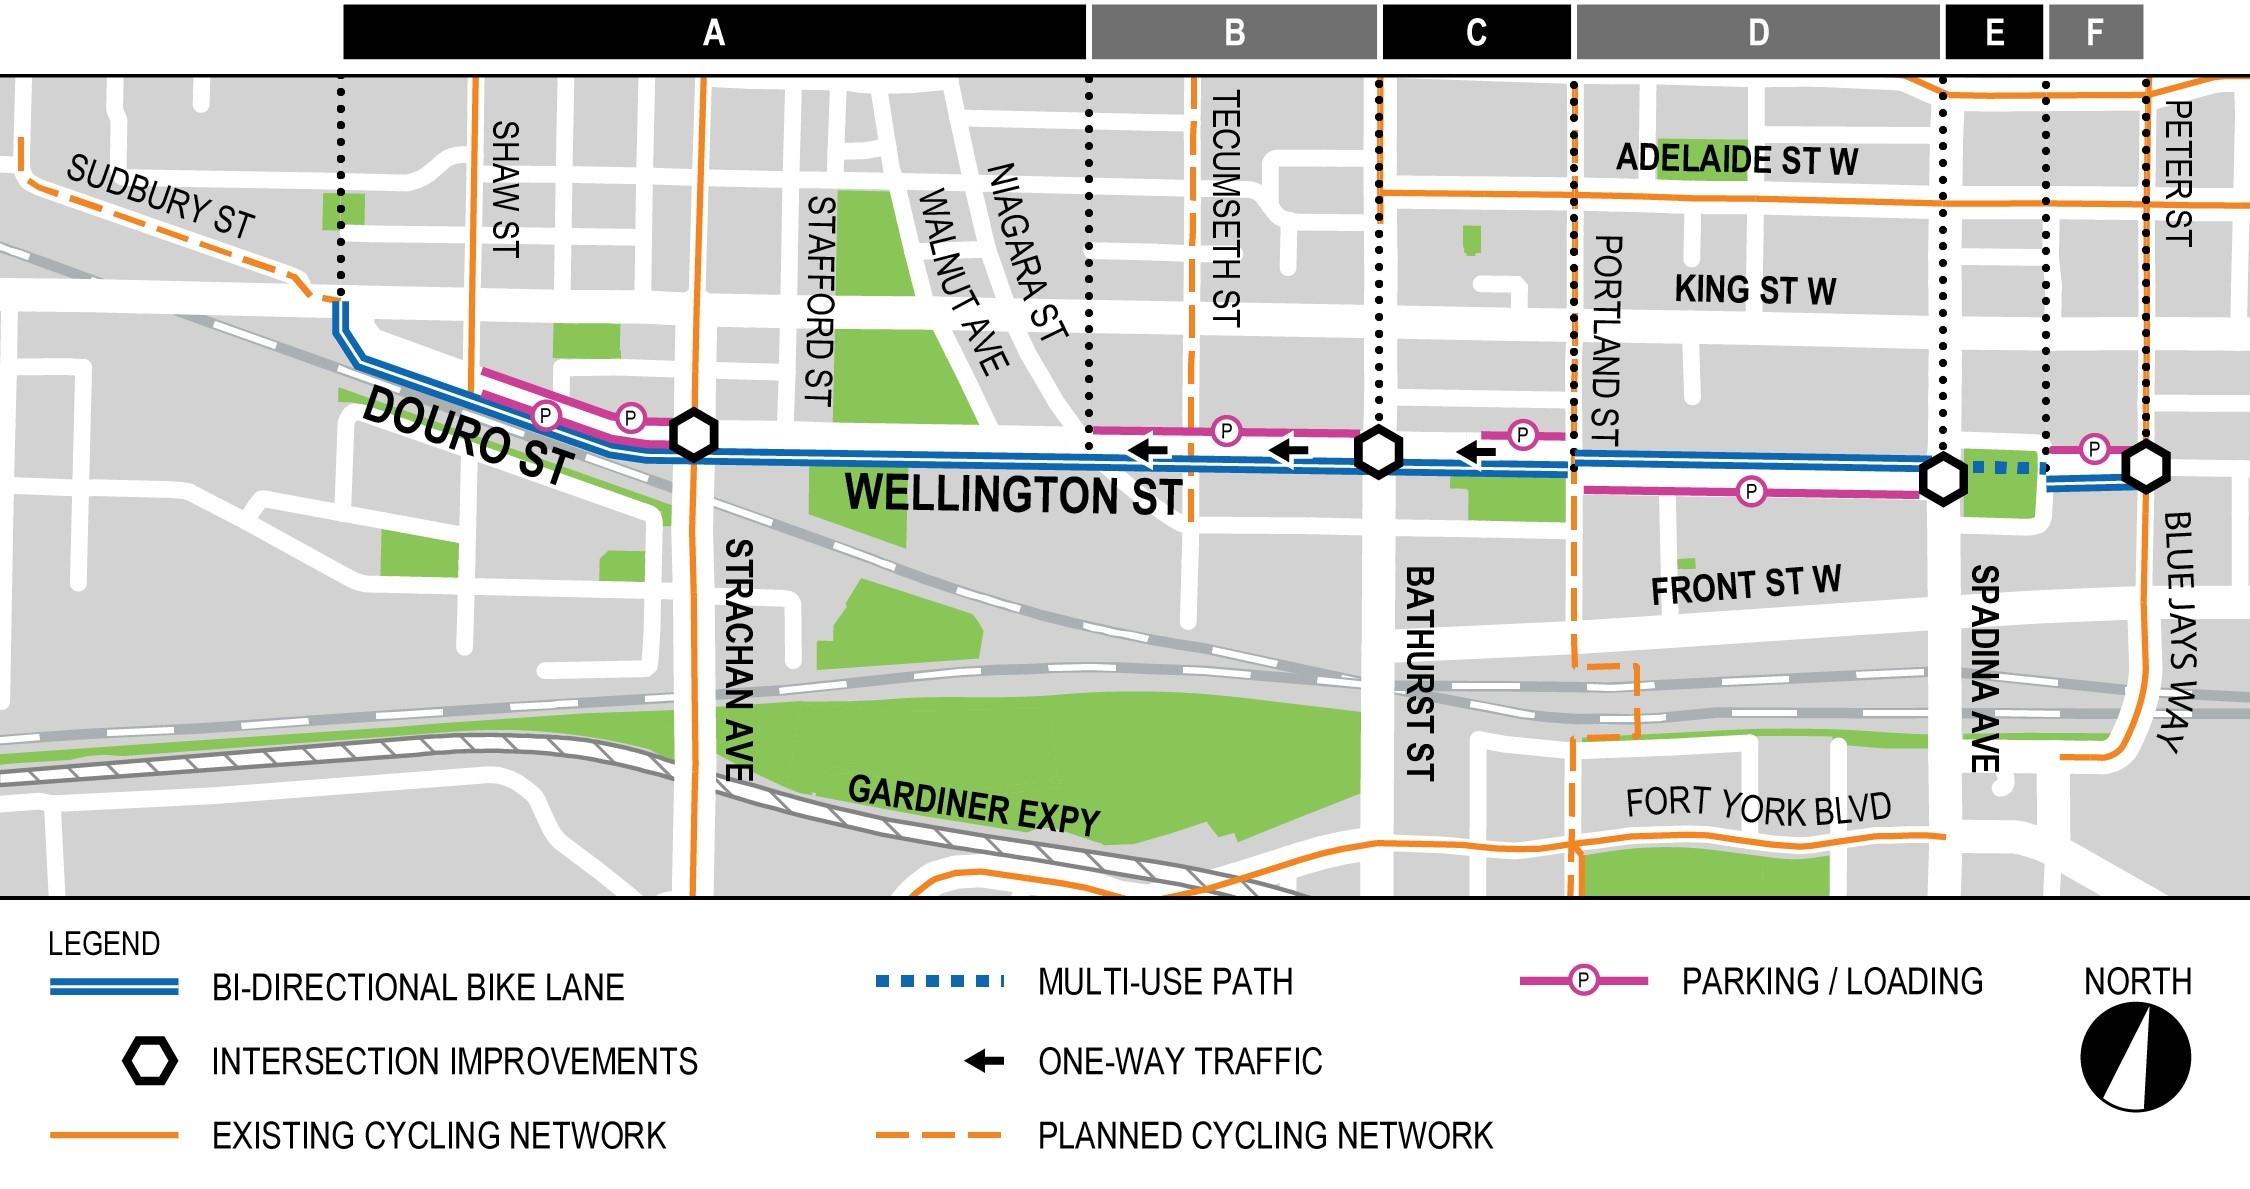 The image displays the areas where safety improvements, including protected bi-directional bike lanes are planned.